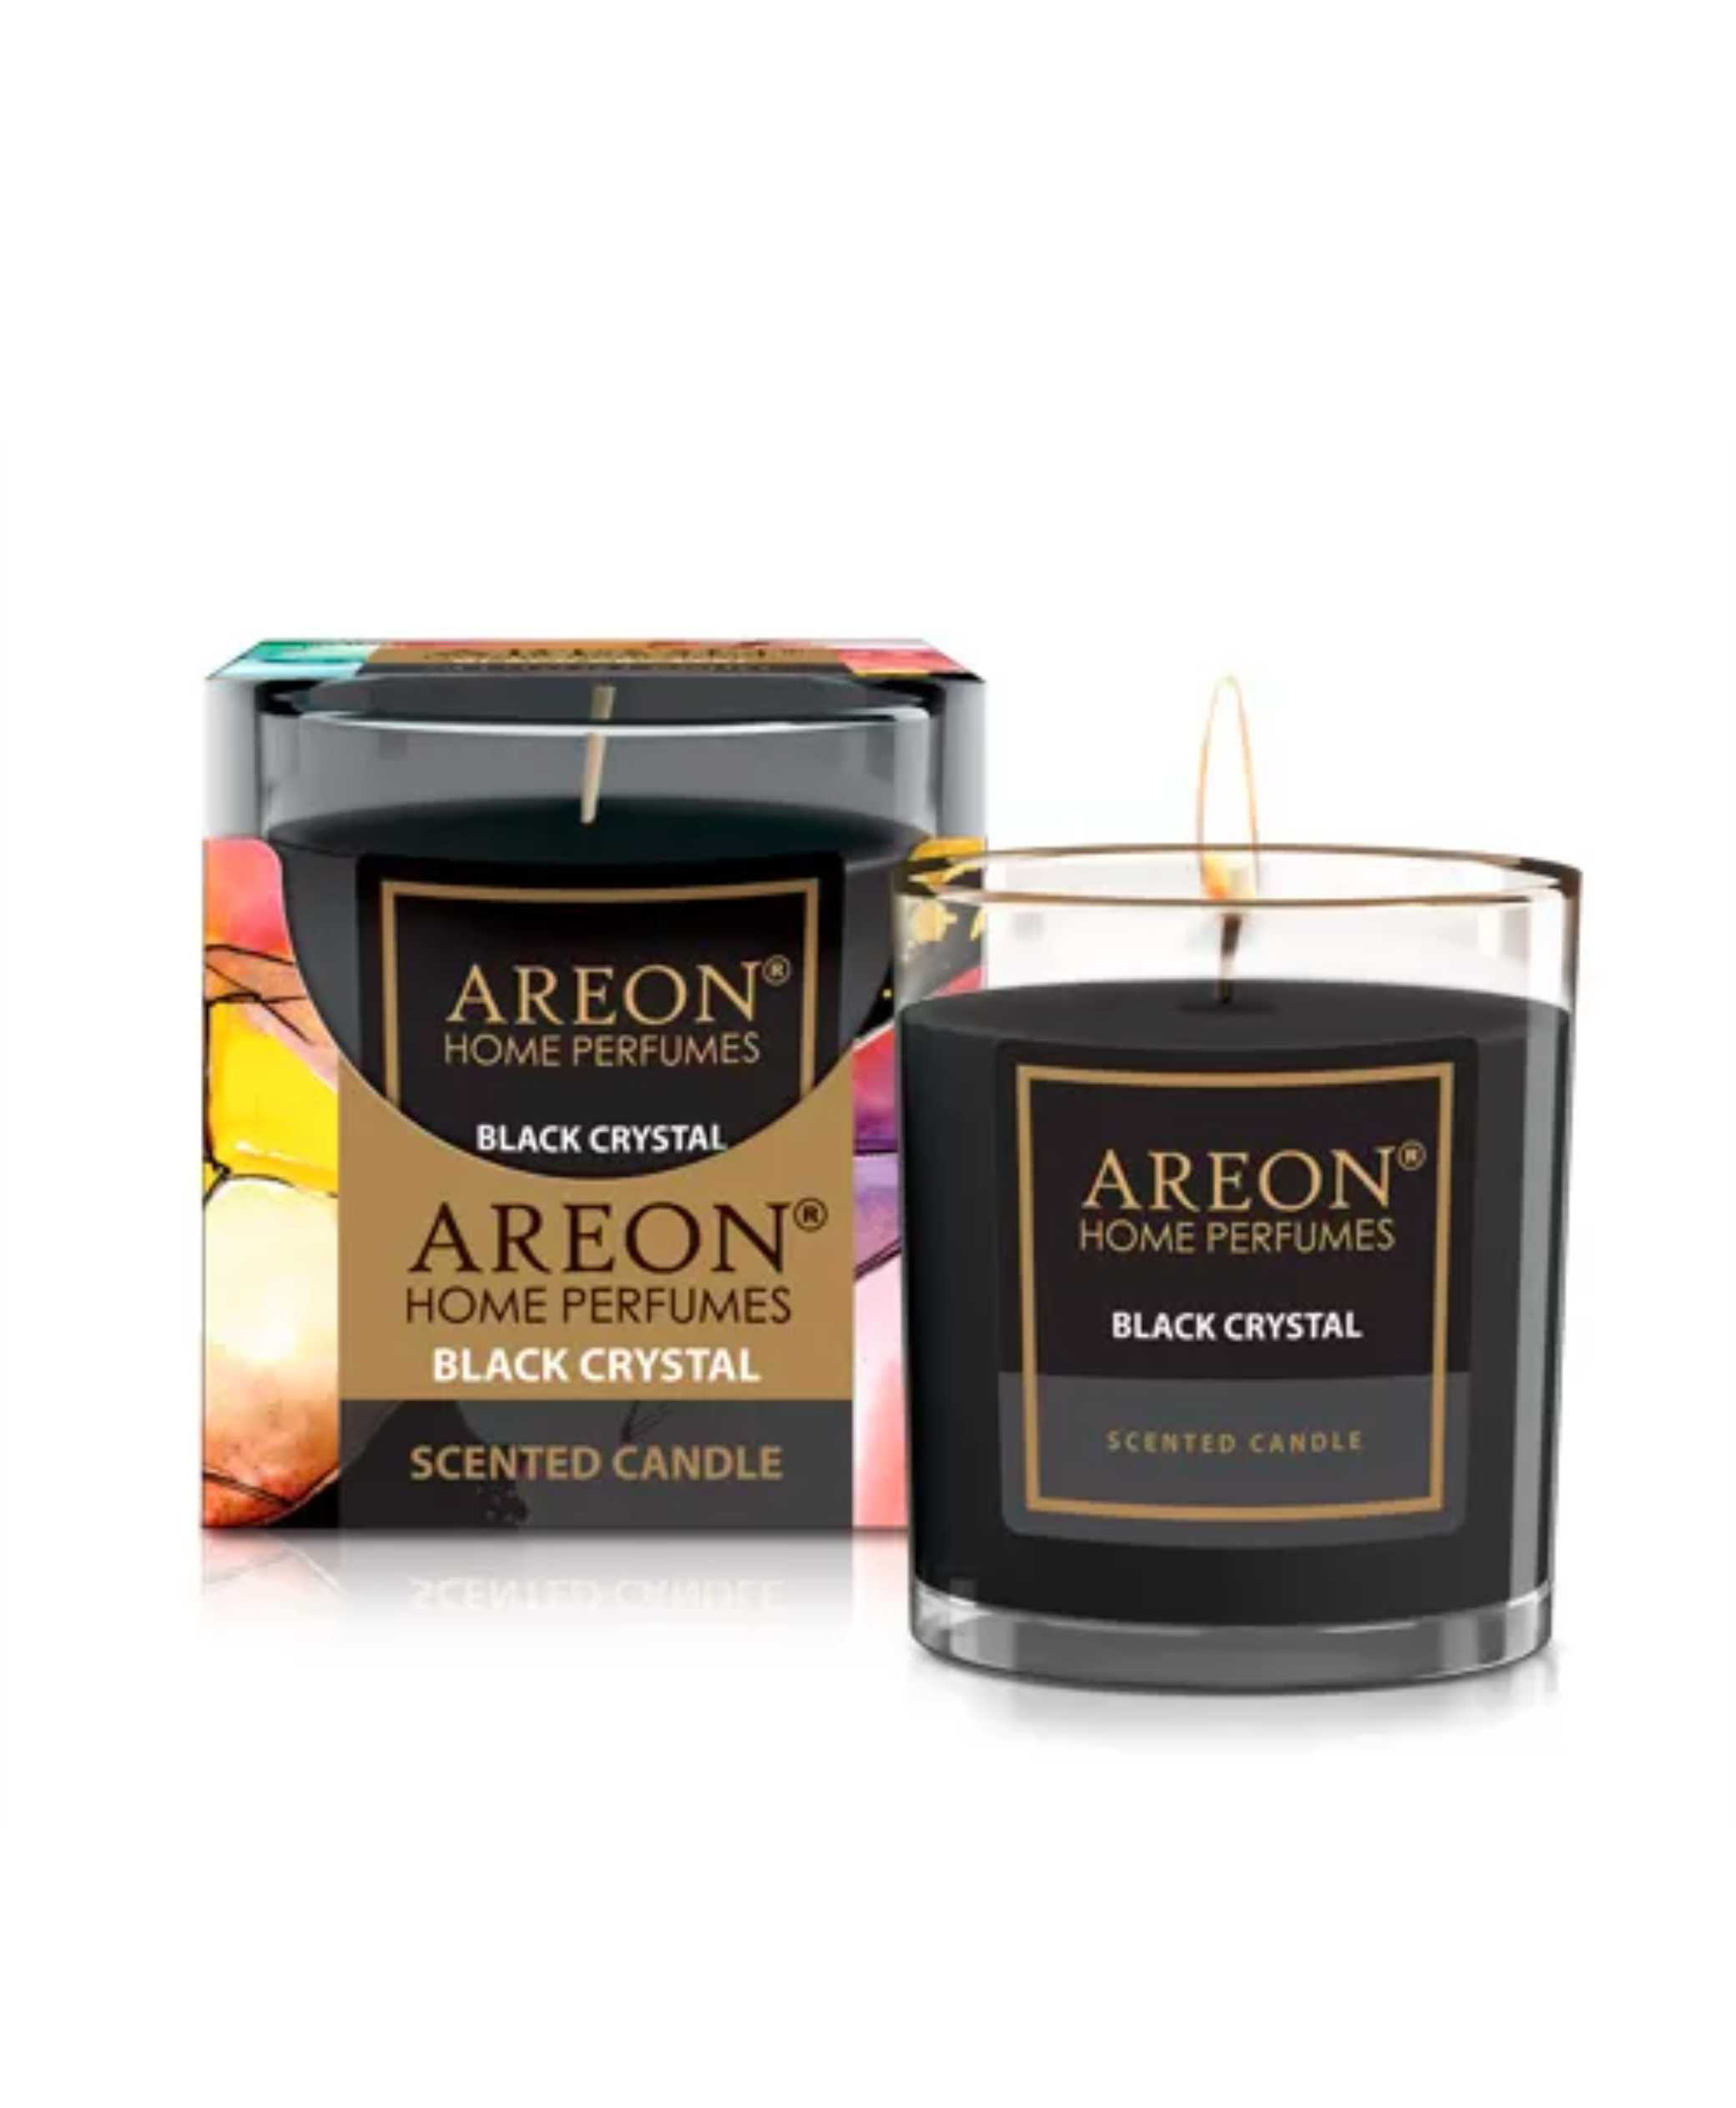 Areon Scented Candle Black Crystal